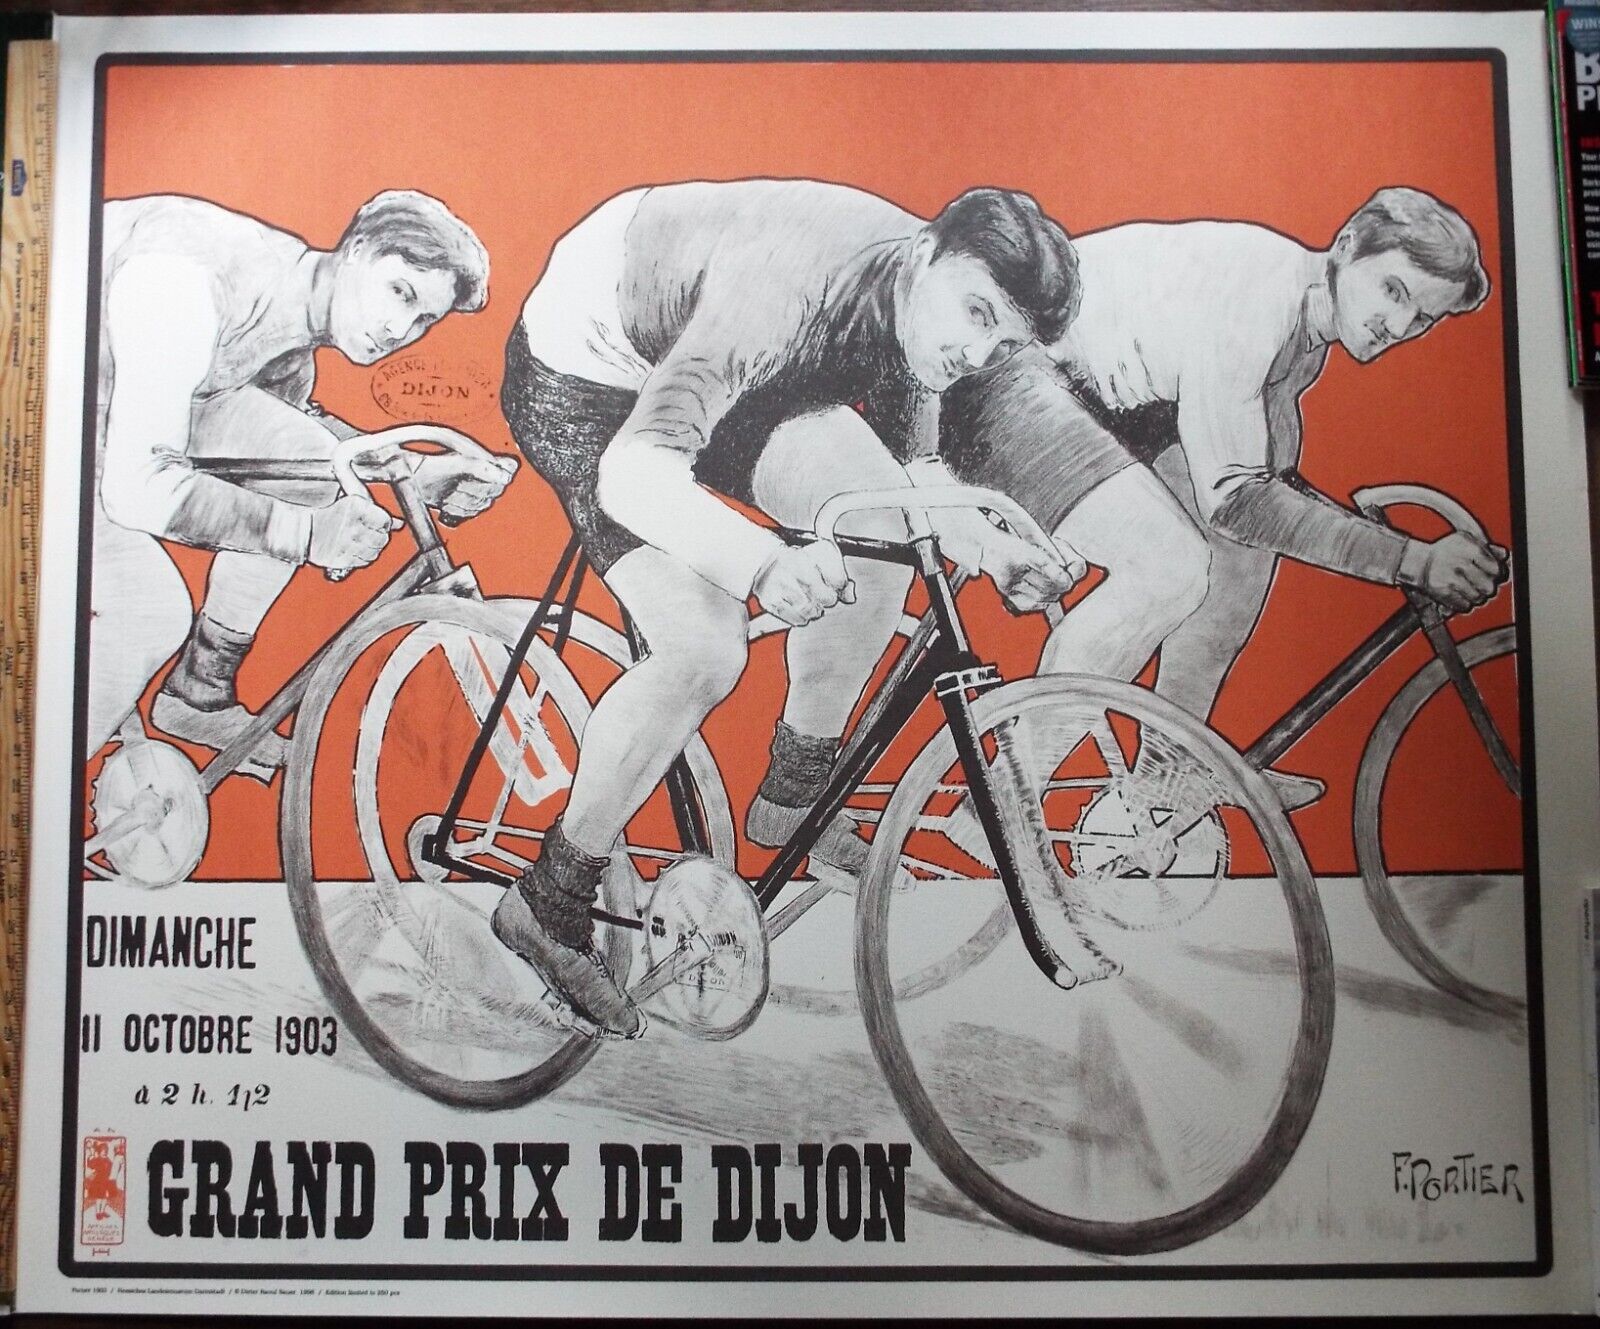 Vintage 1903 GRAND PRIX DE DIJON BICYCLE Poster, Limited Edition, 38 x 46 Inches